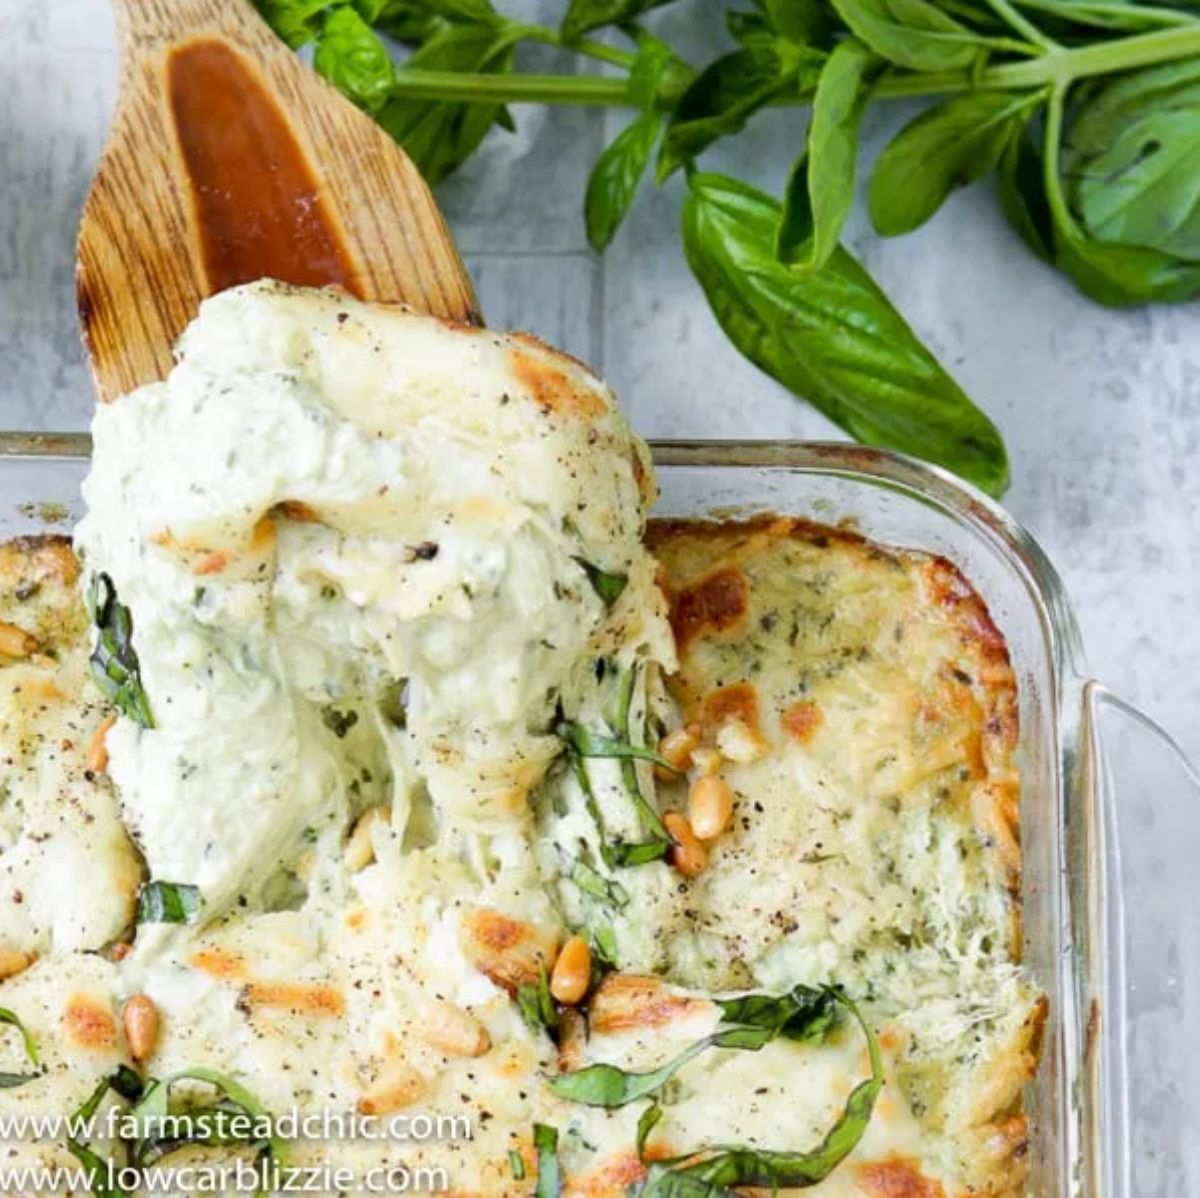 on a white tiled surface, a sprig of basil is at the top of the photo. A wooden spoon sticks into a glass casserol dish full of cheesy casserole with pine nut and basil garnish